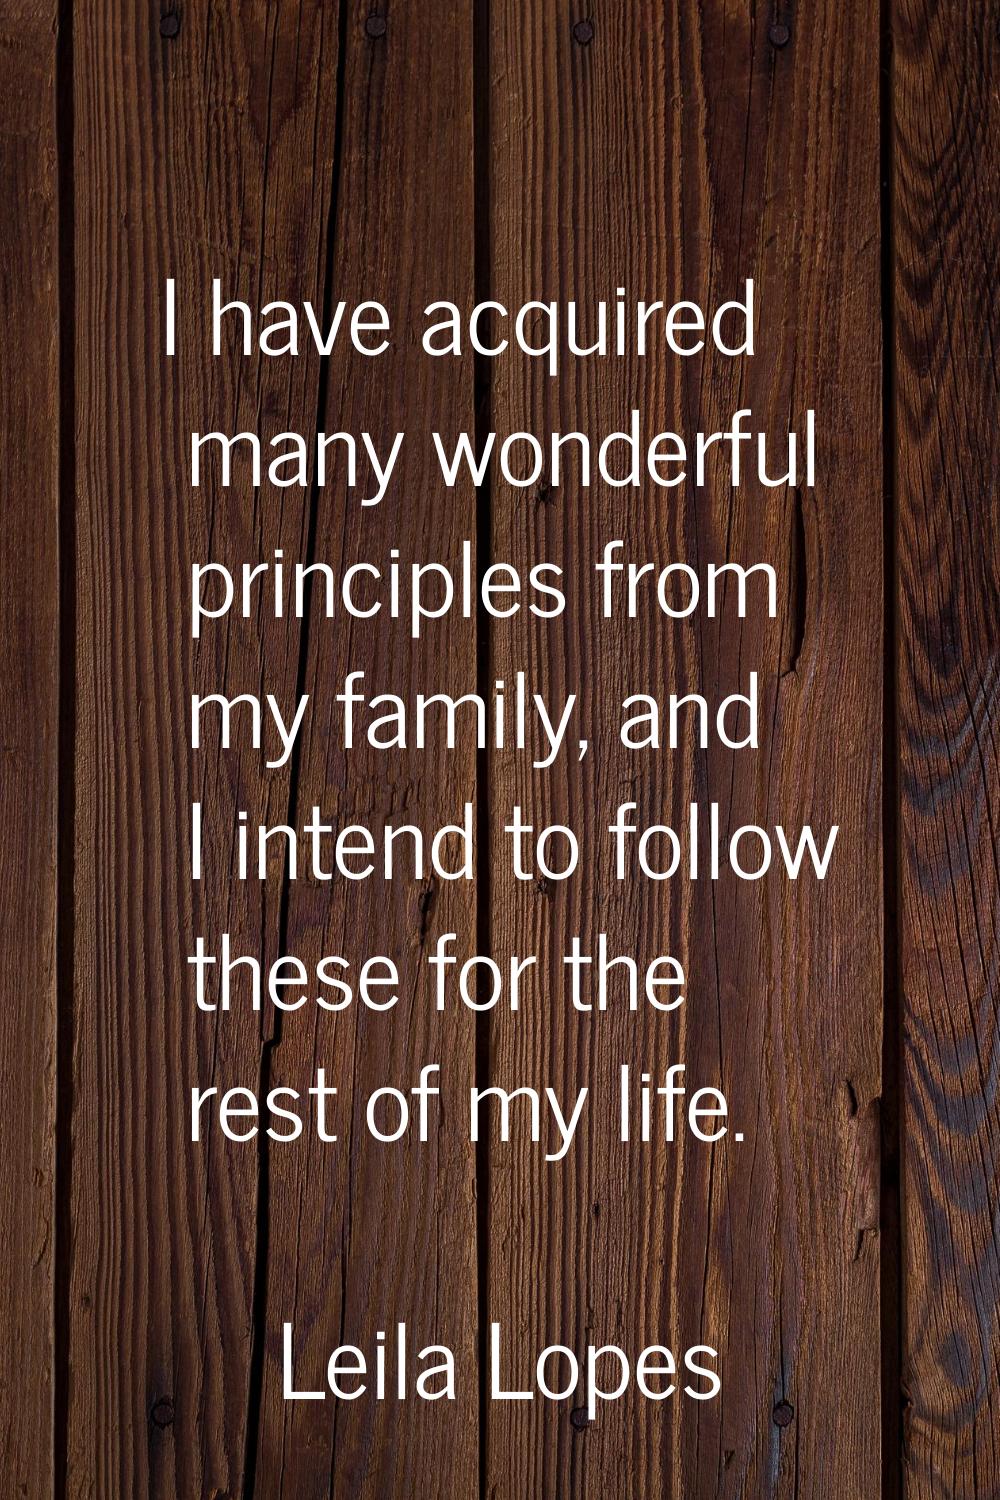 I have acquired many wonderful principles from my family, and I intend to follow these for the rest